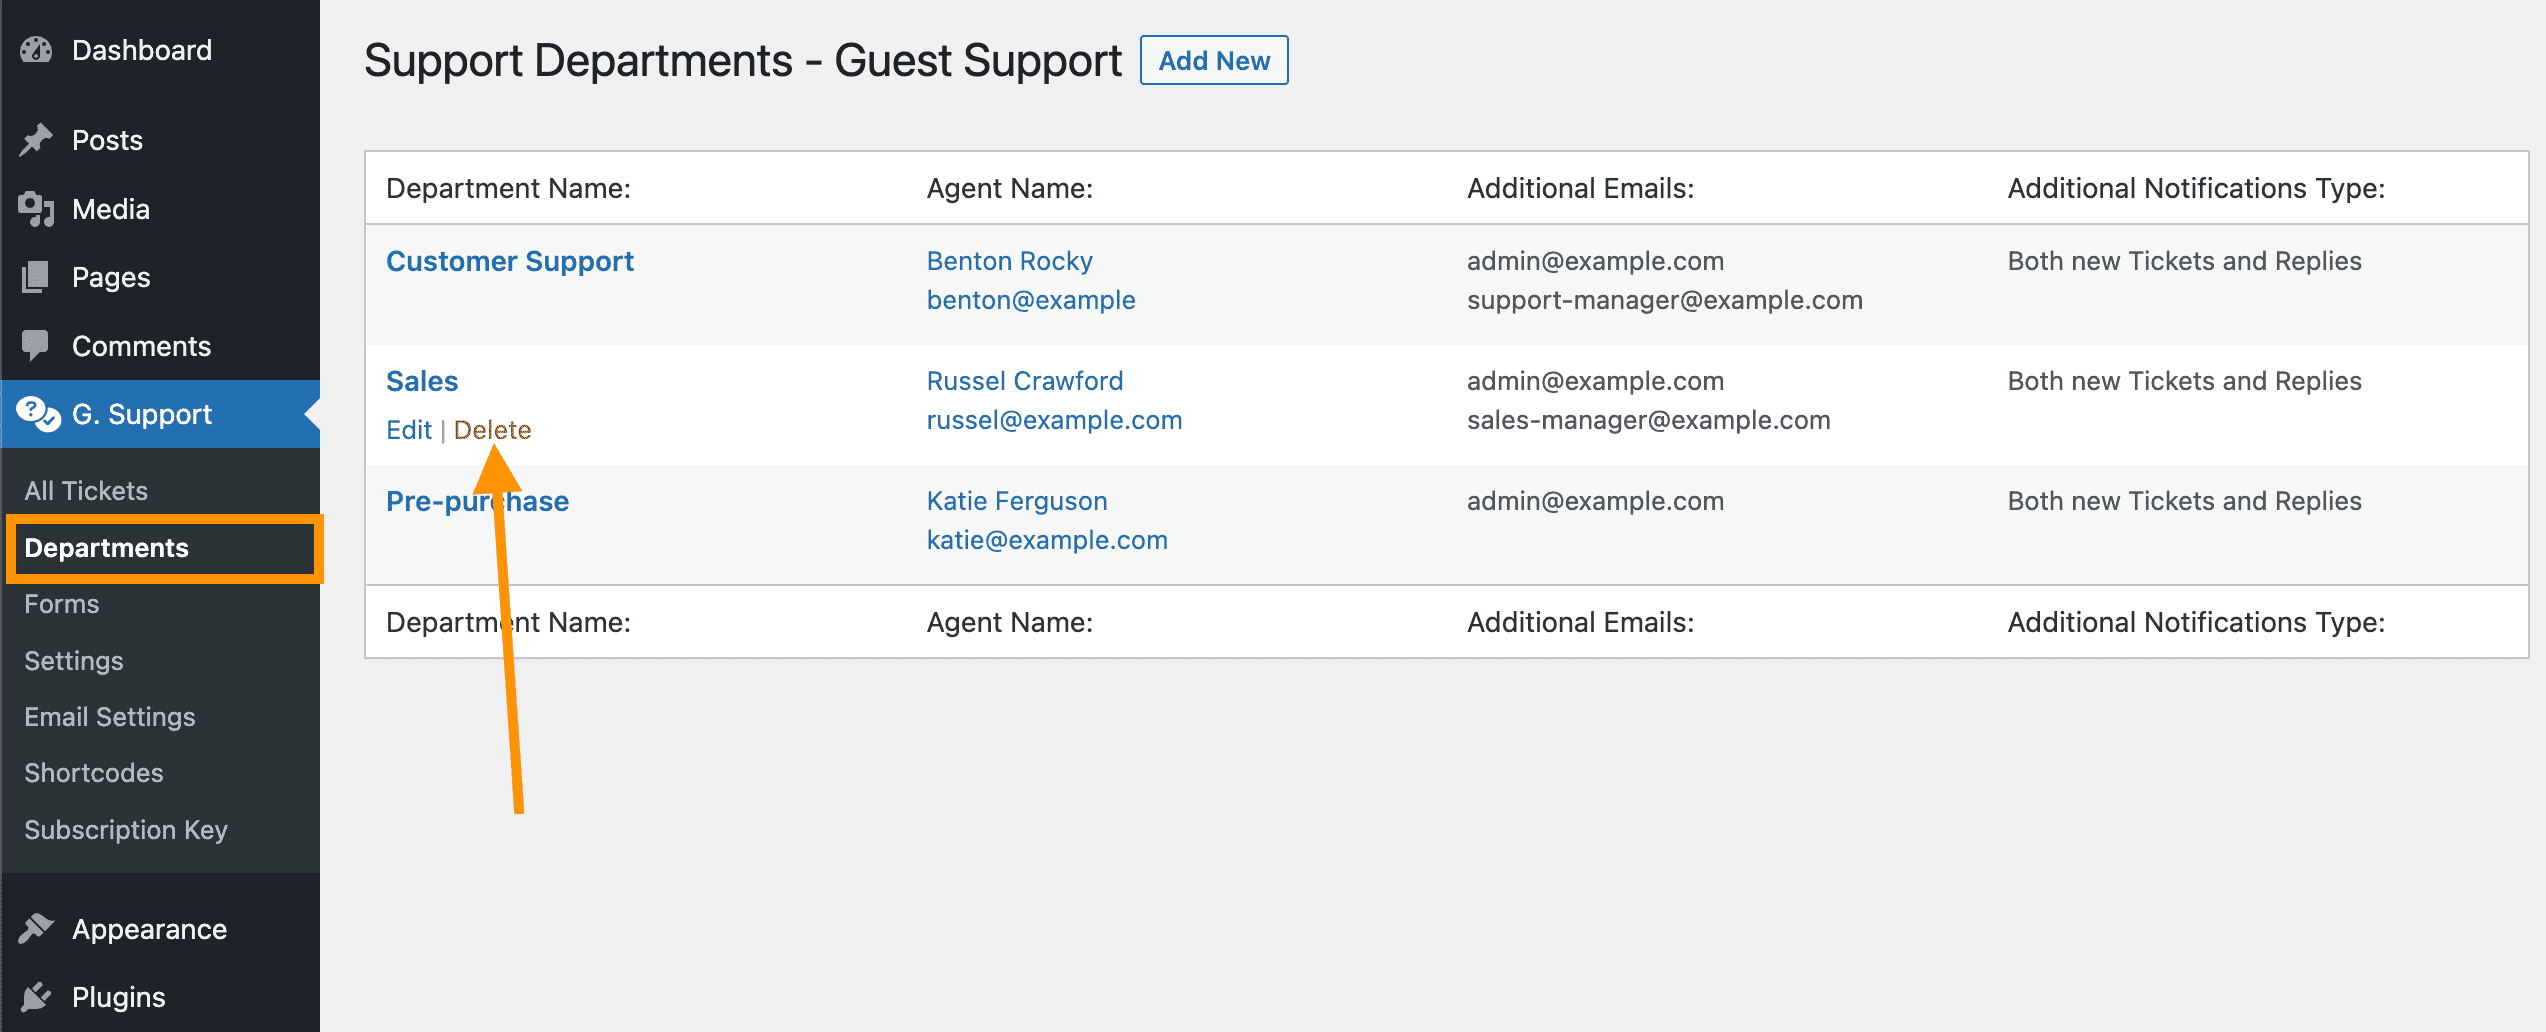 Guest support - delete departments